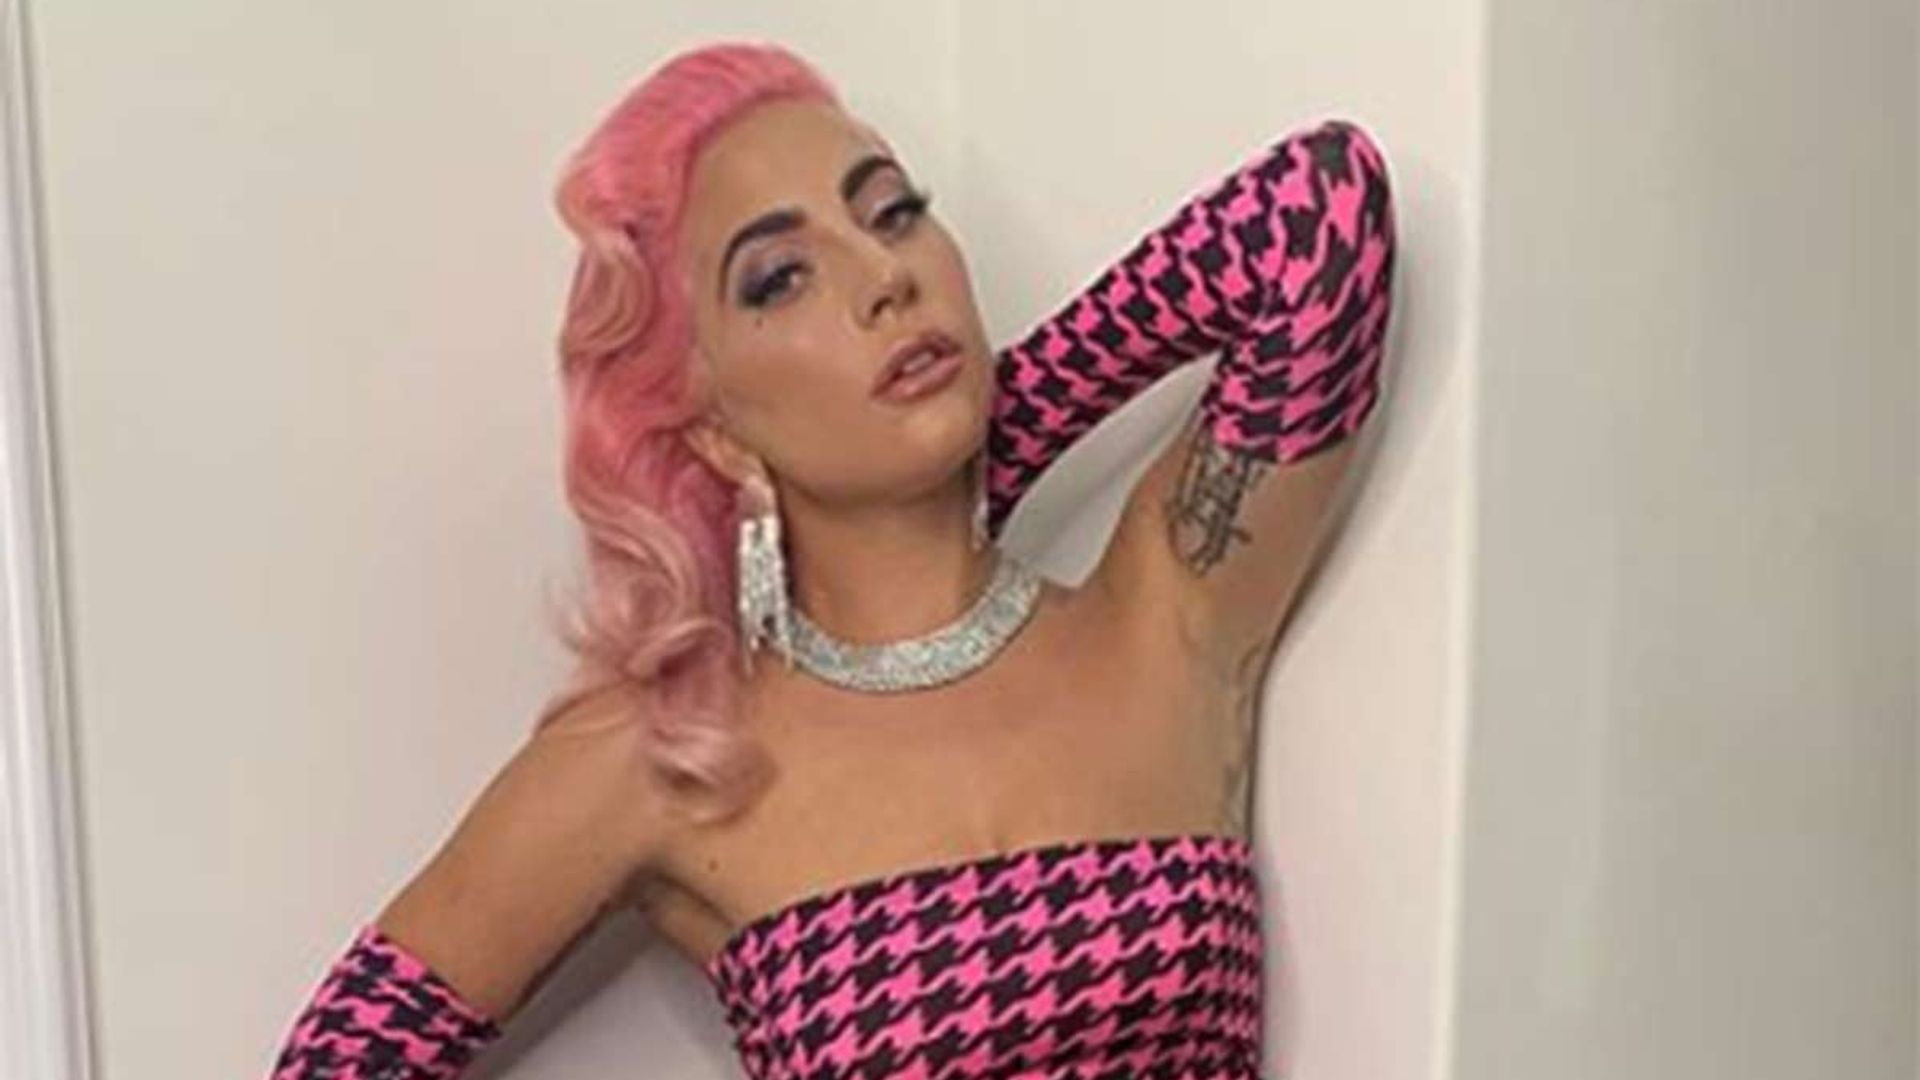 Lady Gaga matches her hair to her pink bridesmaid dress at best friend's wedding